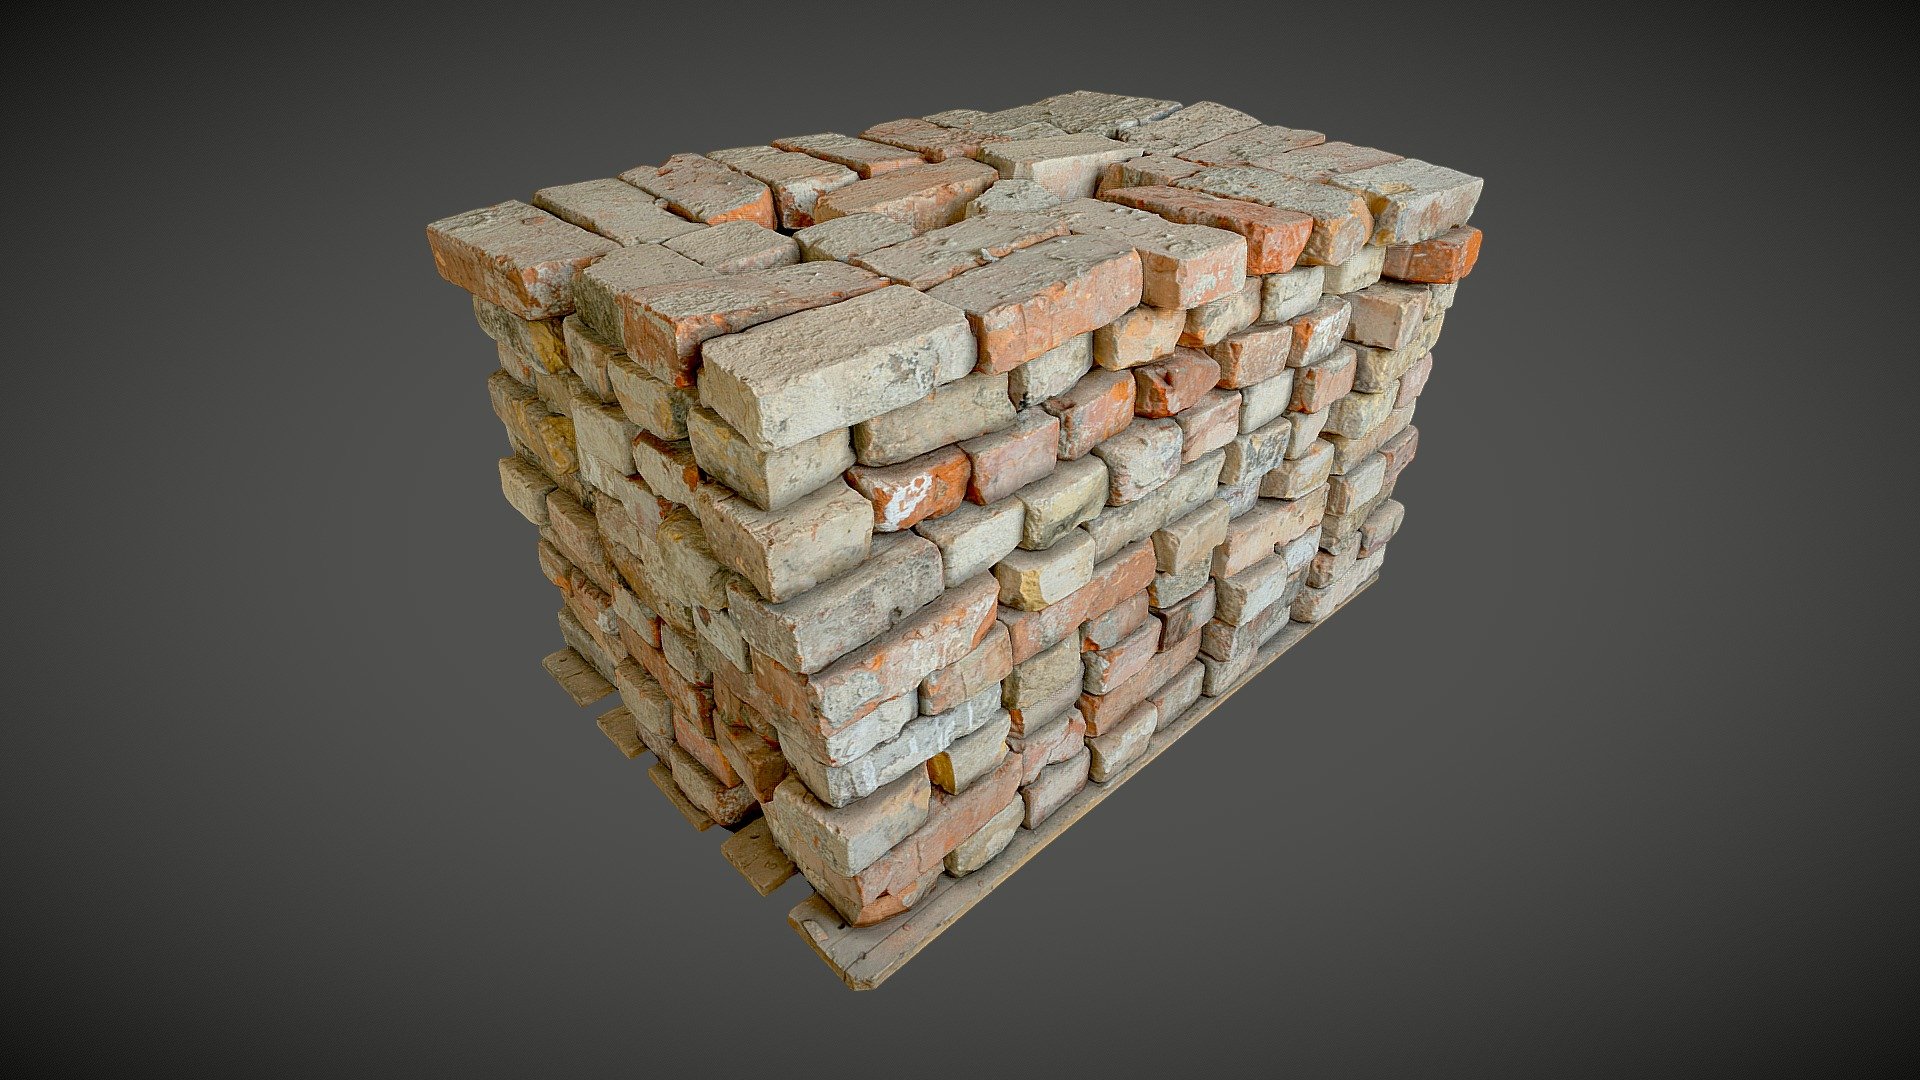 Brick pallet, stack.

Model 3D created in RC from 121 images (sony a6000)

Download version:

FBX Triangles: 100 K Textures: 1x8192x8192u1v1 jpg + normal

FBX Triangles: 1 mln Textures: 1x8192x8192u1v1 jpg + normal

All normal maps generated from 3D model with 25 mln triangles.

If you need re-exporting or are interested in source images, please email me.

If you like my work leave a like or comment and follow me for more! Thanks :) - Brick pallet, stack - Buy Royalty Free 3D model by archiwum_xyz 3d model